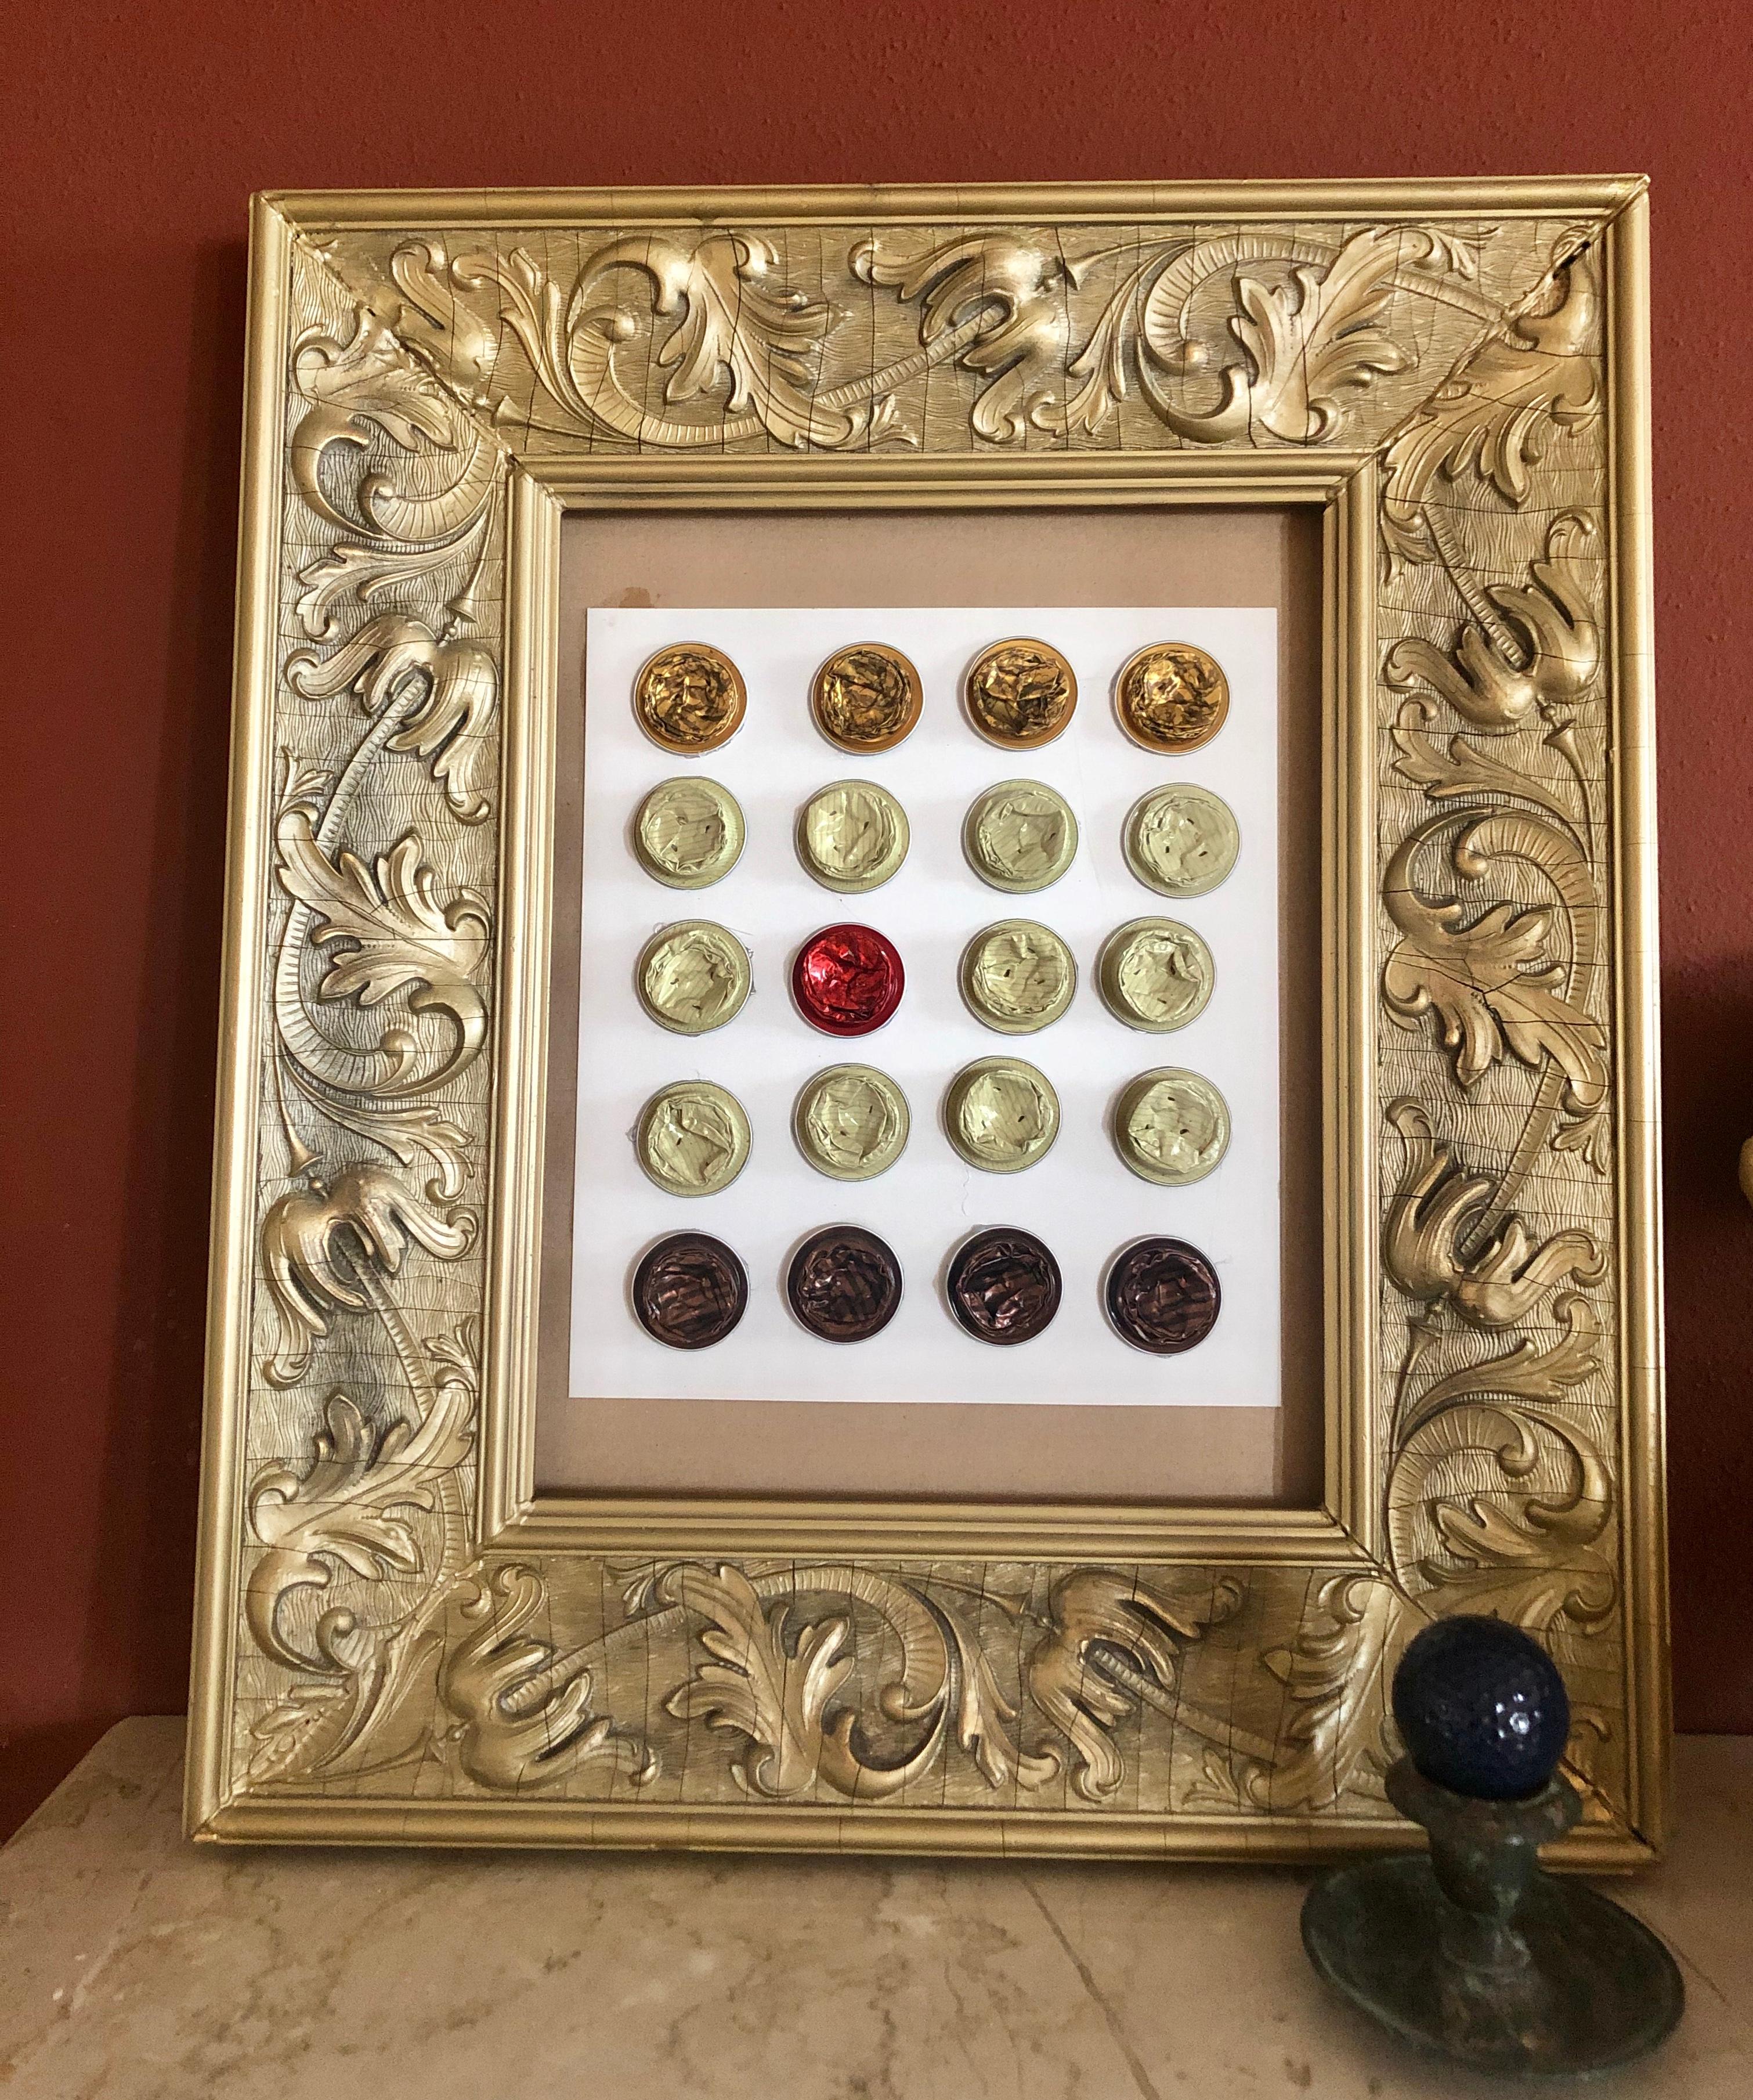 Unique, from the cycle RECYCLED, used NESPRESSO capsules, recycled items/ cartoon, heavy gold wooden frame. SalamonArt certificate will be provided.